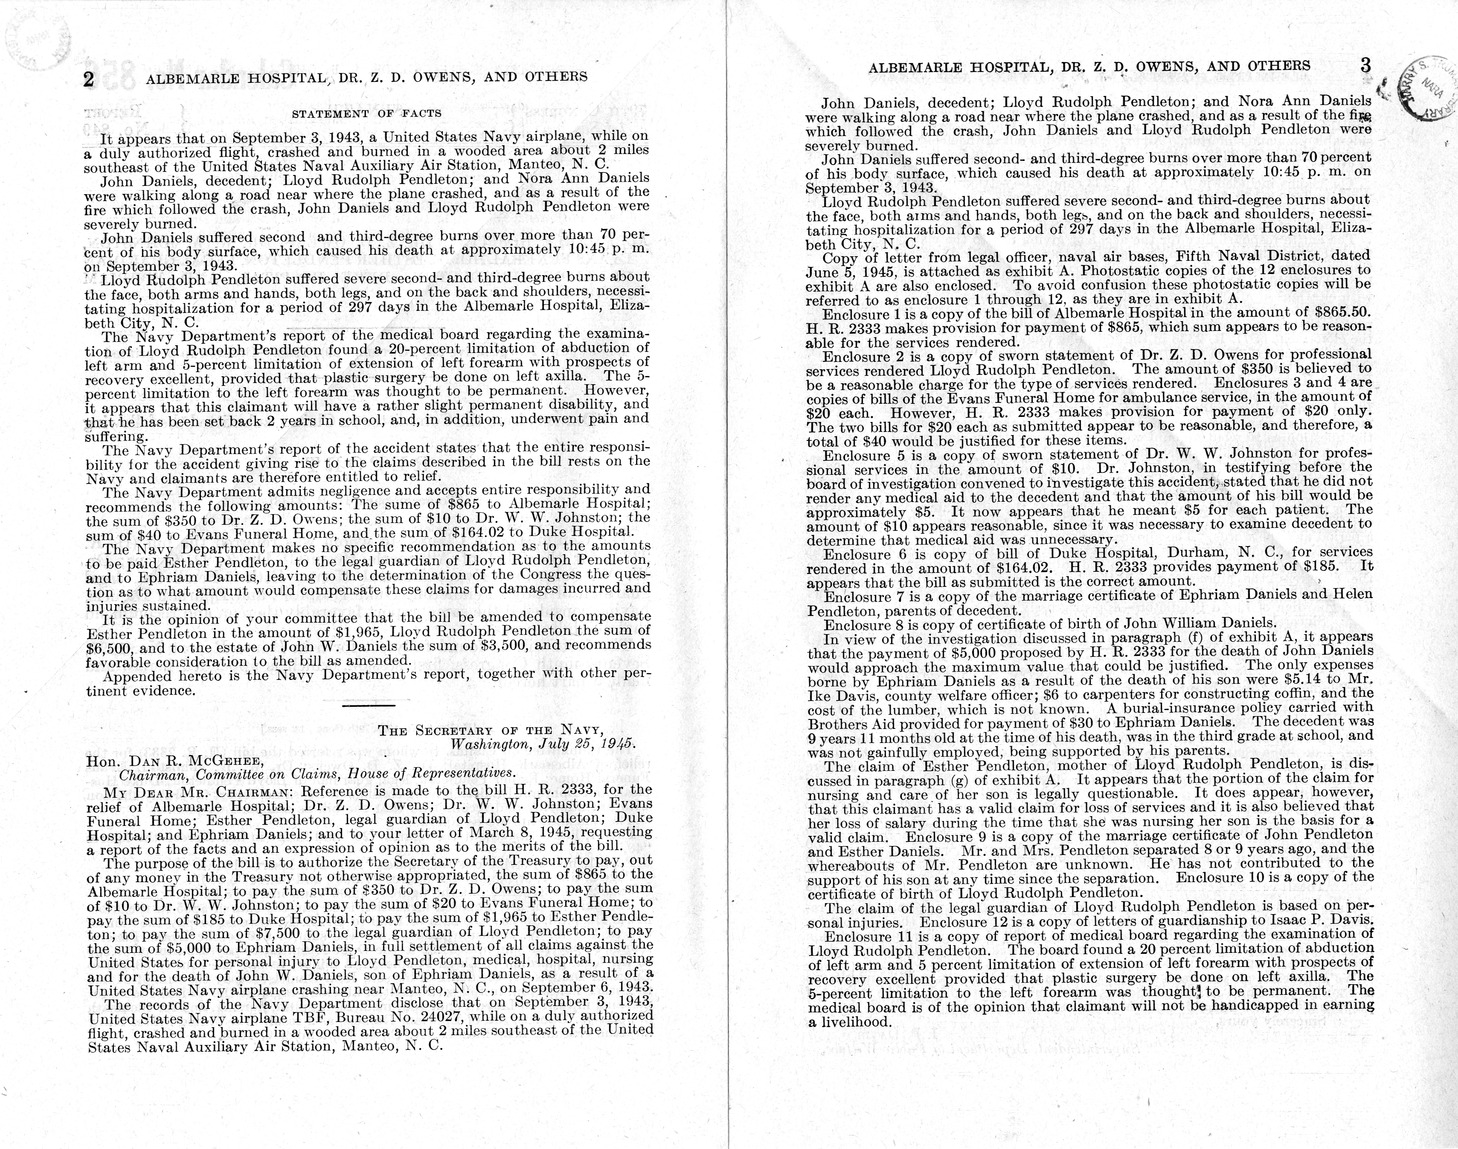 Memorandum from Frederick J. Bailey to M. C. Latta, H.R. 2333, For the Relief of Albemarle Hospital, Doctor Z. D. Owens, Doctor W. W. Johnston, Evans Funeral Home, Esther Pendleton, Legal Guardian of Lloyd Pendleton, Duke Hospital, and Ephriam Daniels, with Attachments